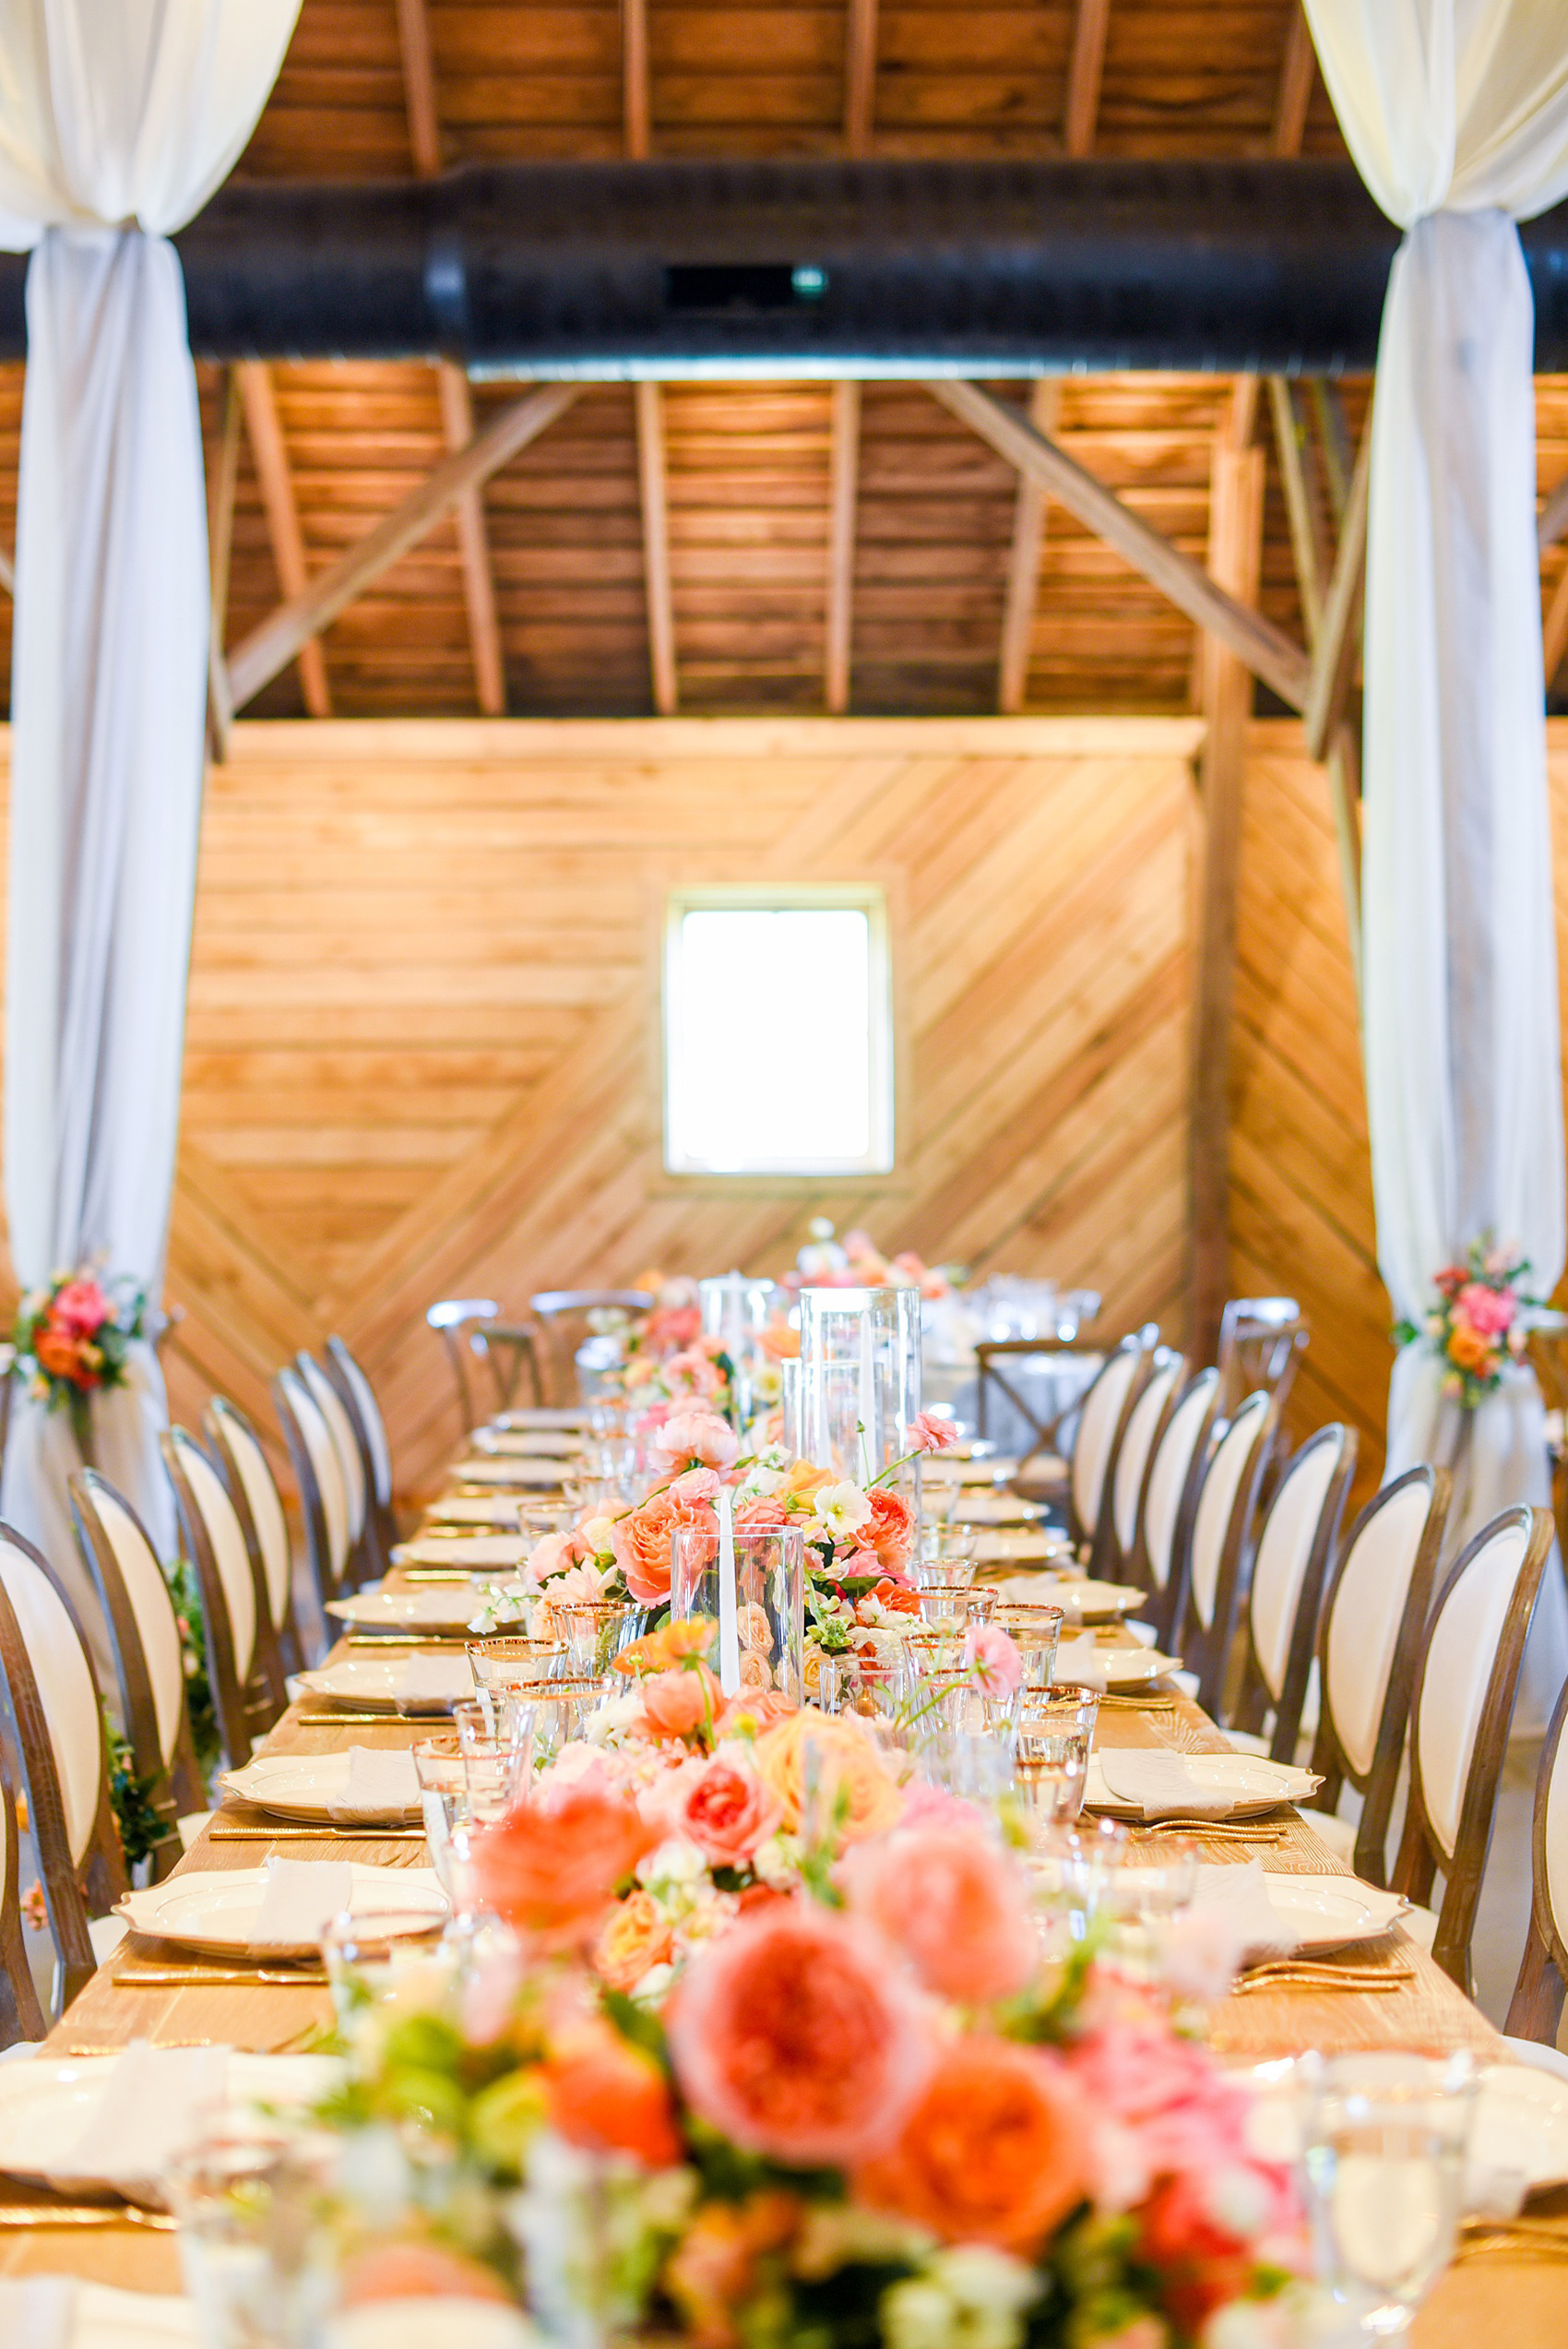 Charlottesville wedding photos by Mikkel Paige Photography. This Virginia venue is perfect for brides and grooms looking for a beautiful farm reception space. It’s green, romantic, and easy to dress up with flowers or keep simple. A rustic and elegant came to life at the reception barn with chandeliers, fabric draping, mixed rectangular farm tables and round luxurious linen-covered round tables inside the venue. Tall and short centerpieces with colorful flowers like garden roses, peonies, ranunculus and succulents completed the tables. Click through for the complete post from this May event at the Lodge at Mount Ida Farm! Planning and design by @vivalevent and flowers by @apassarelli of Meristem Floral. #Charlottesville #mountidafarm #lodgeatmountida #CharlottesvilleVA #CharlottesvilleVirginia #Charlottesvillewedding #Charlottesvilleweddingphotographer #mikkelpaige #MeristemFloral #VivaLEvent